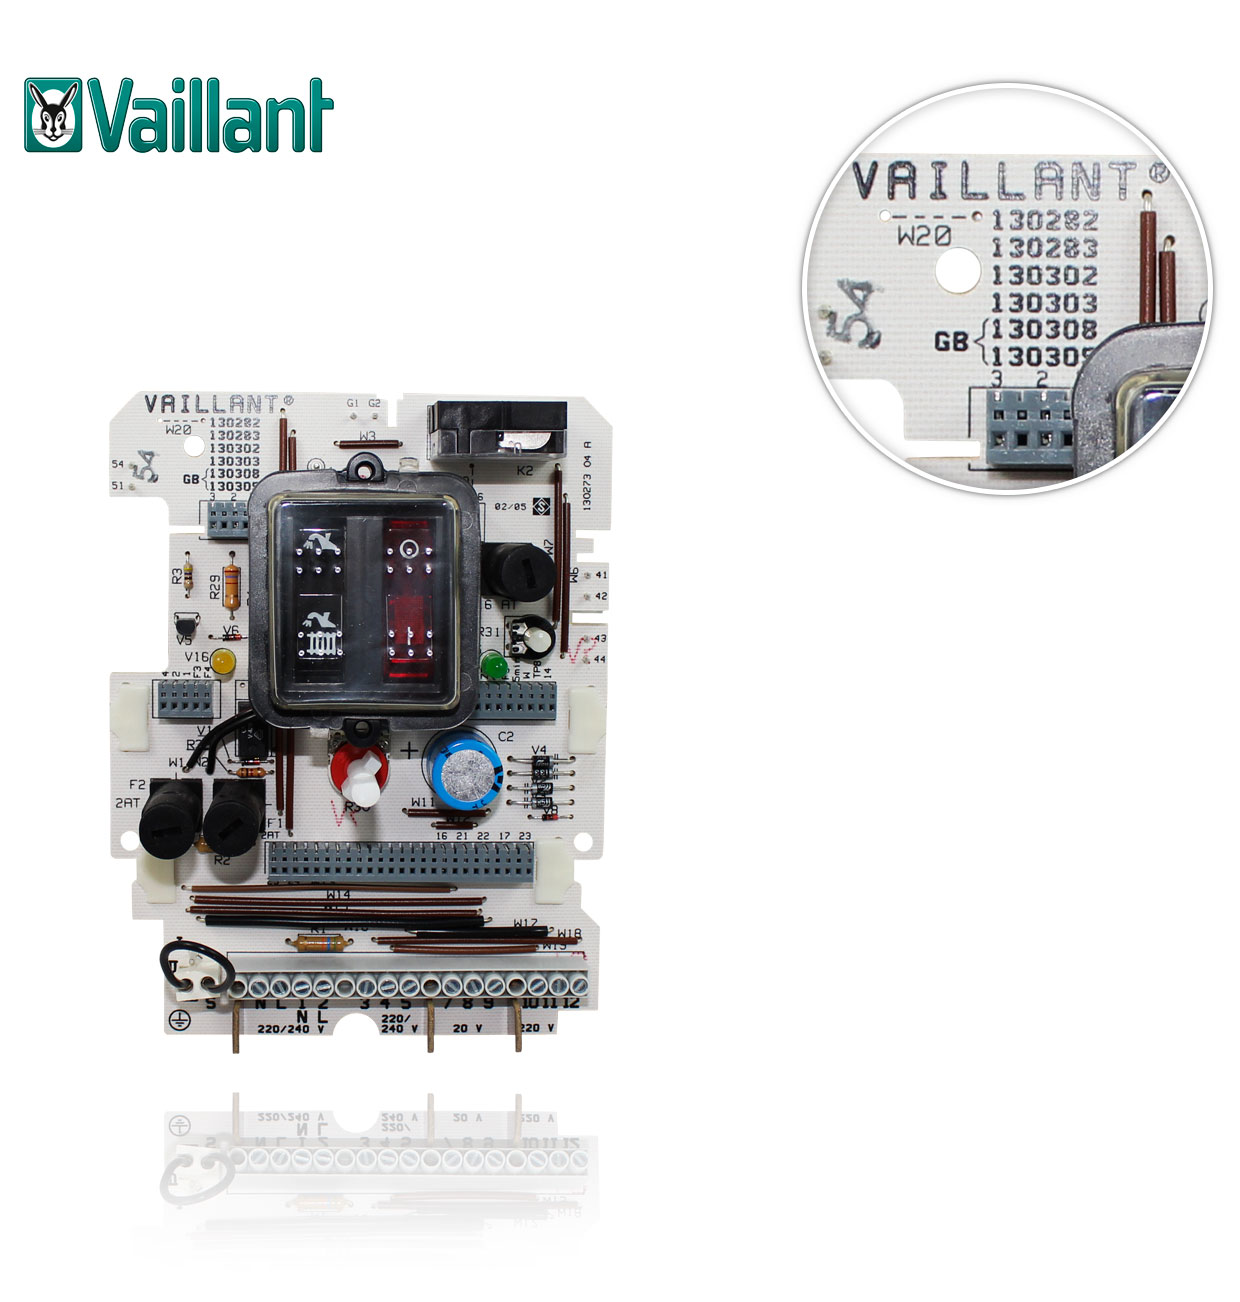 VAILLANT 130312 ELECTRONIC PUSH-BUTTON PANEL FOR VCW